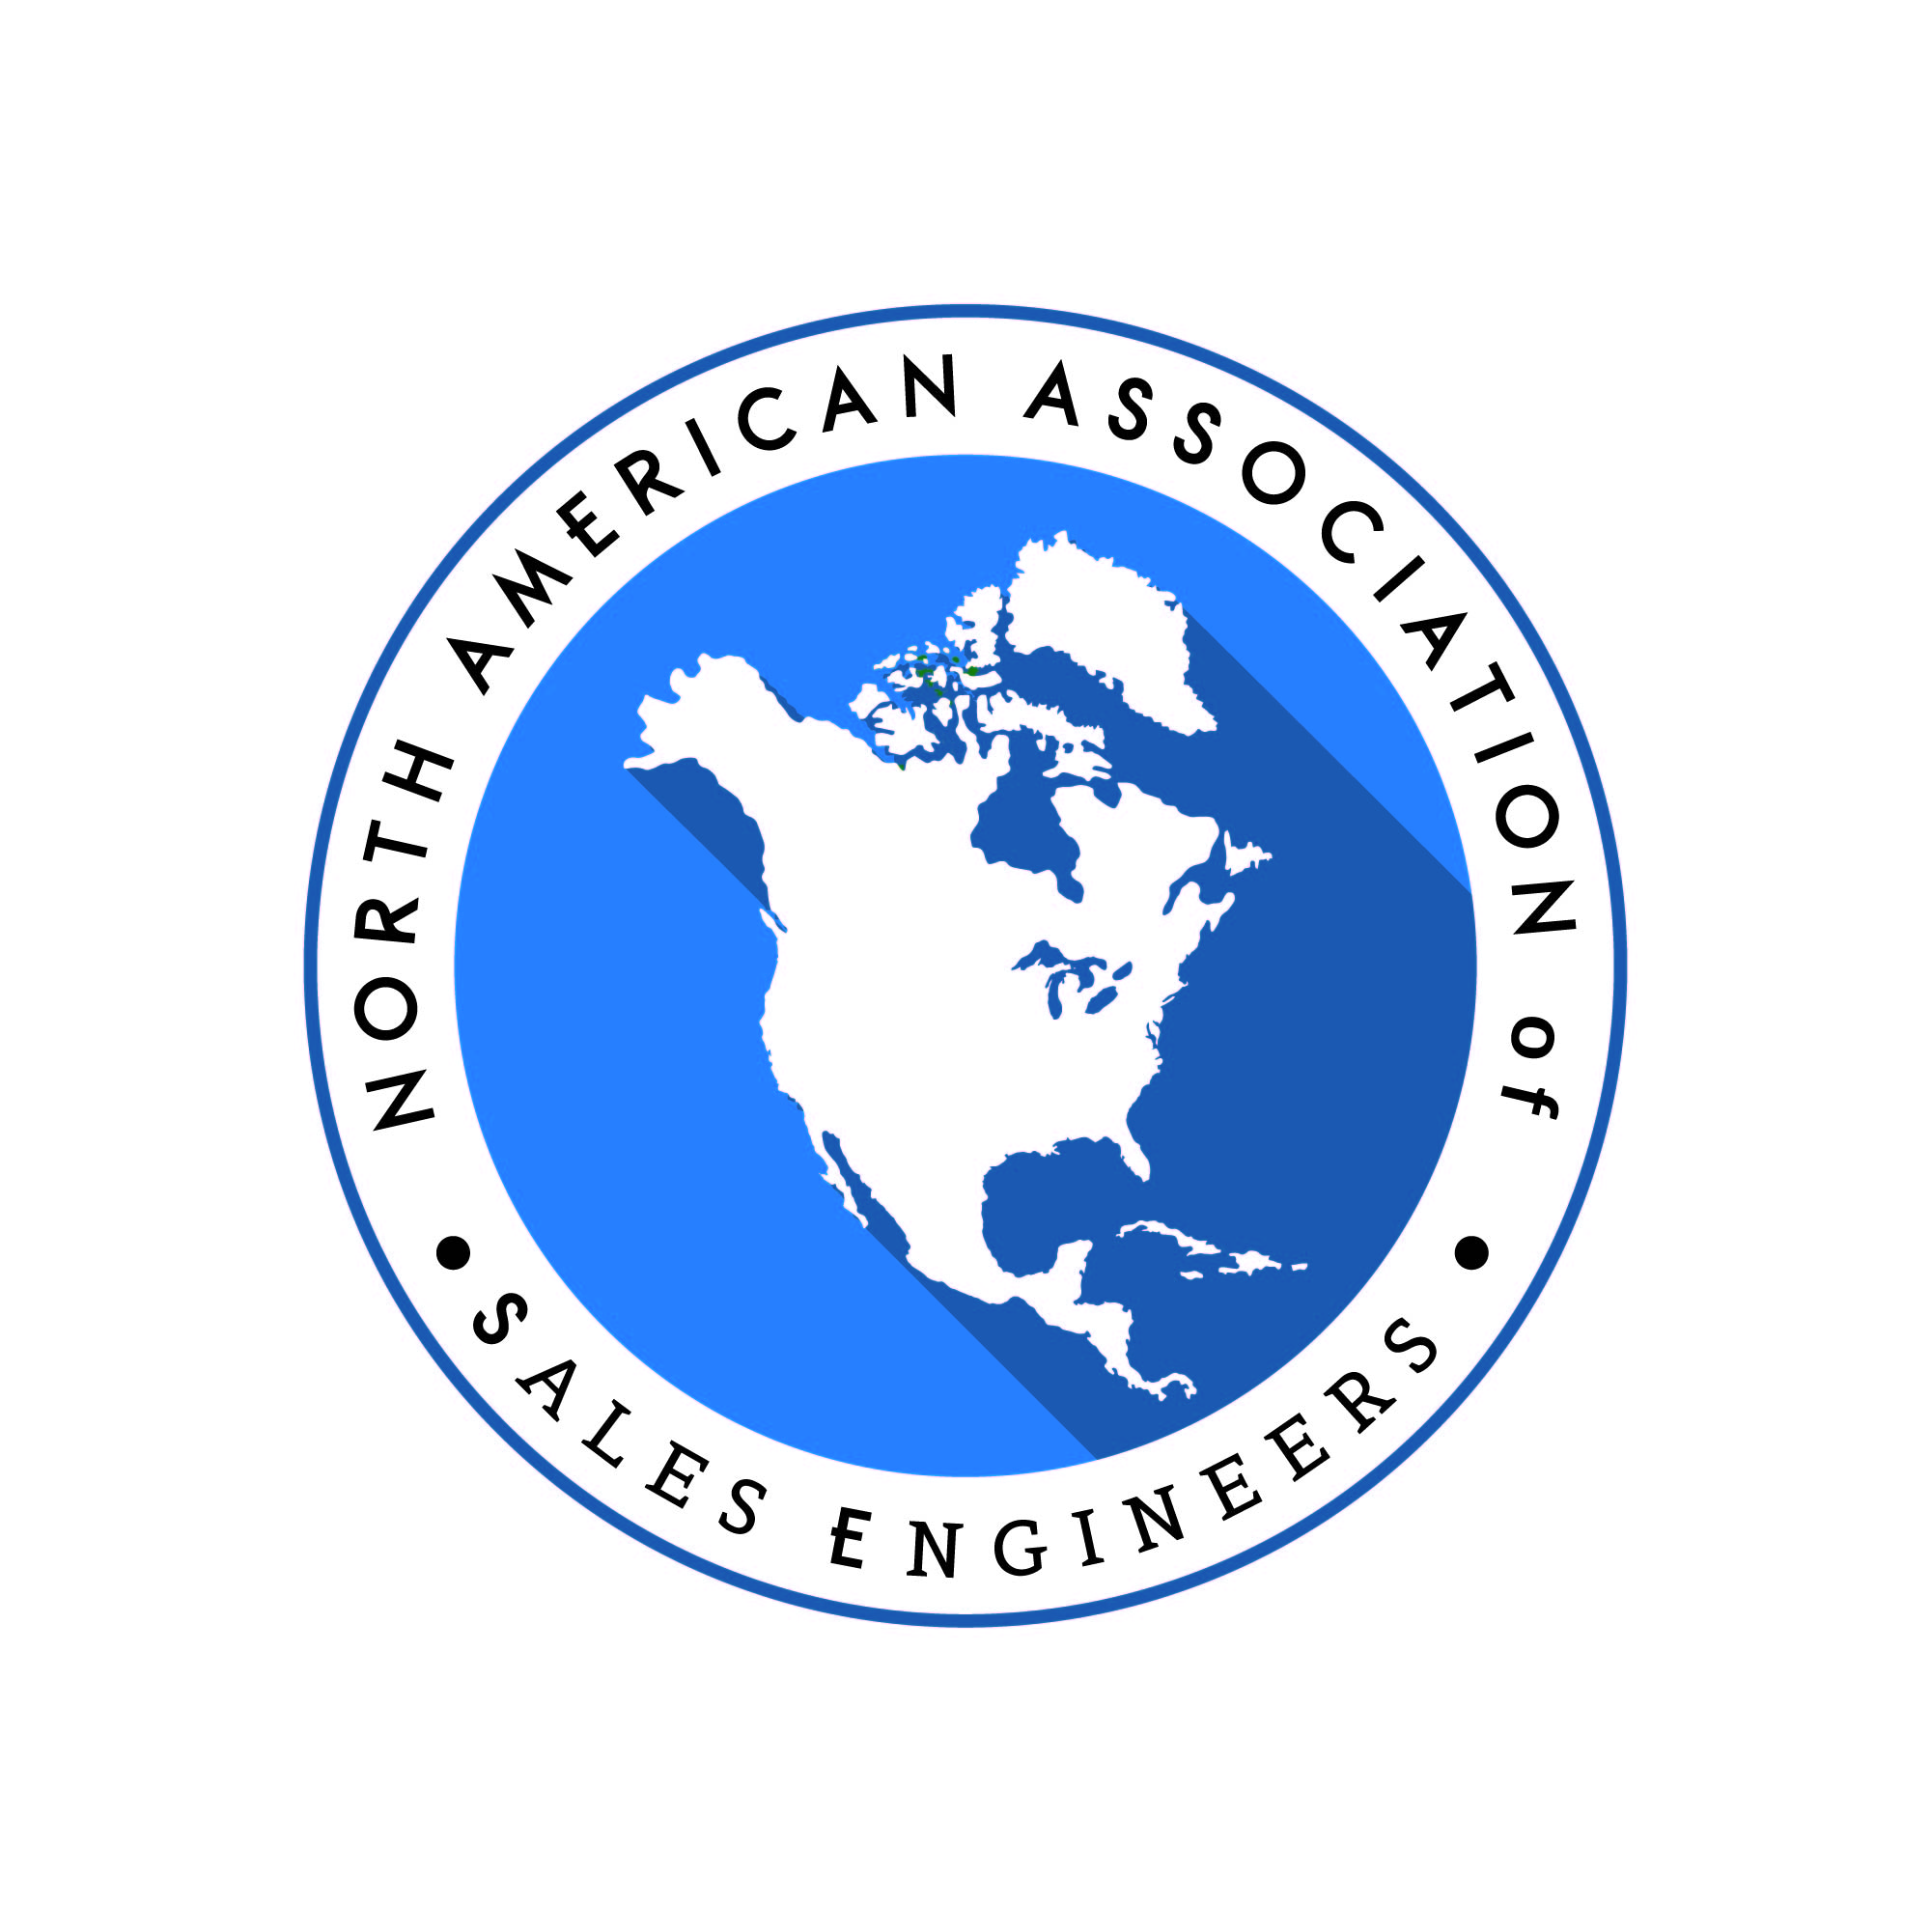 Vivun a New Corporate Sponsor for North American Association of Sales Engineers